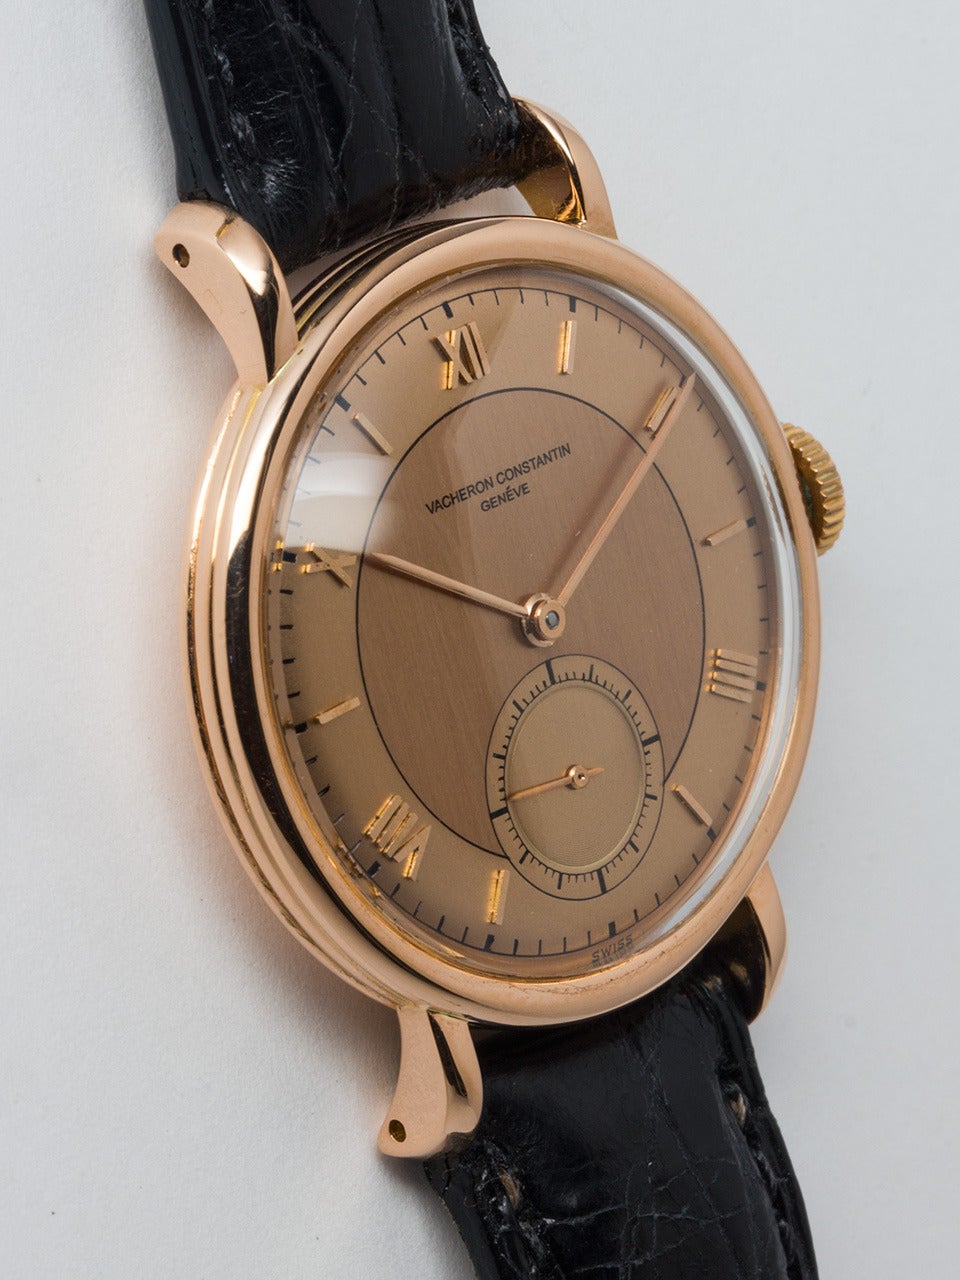 Vacheron & Constantin 18K Rose Gold Wristwtach, Ref. 453/2C, circa 1950s. 35mm heavy snap-back case. A beautifully restored salmon dial with raised Roman and baton numerals. Powered by a 17-jewel manual-wind movement with subsidiary seconds. Offered